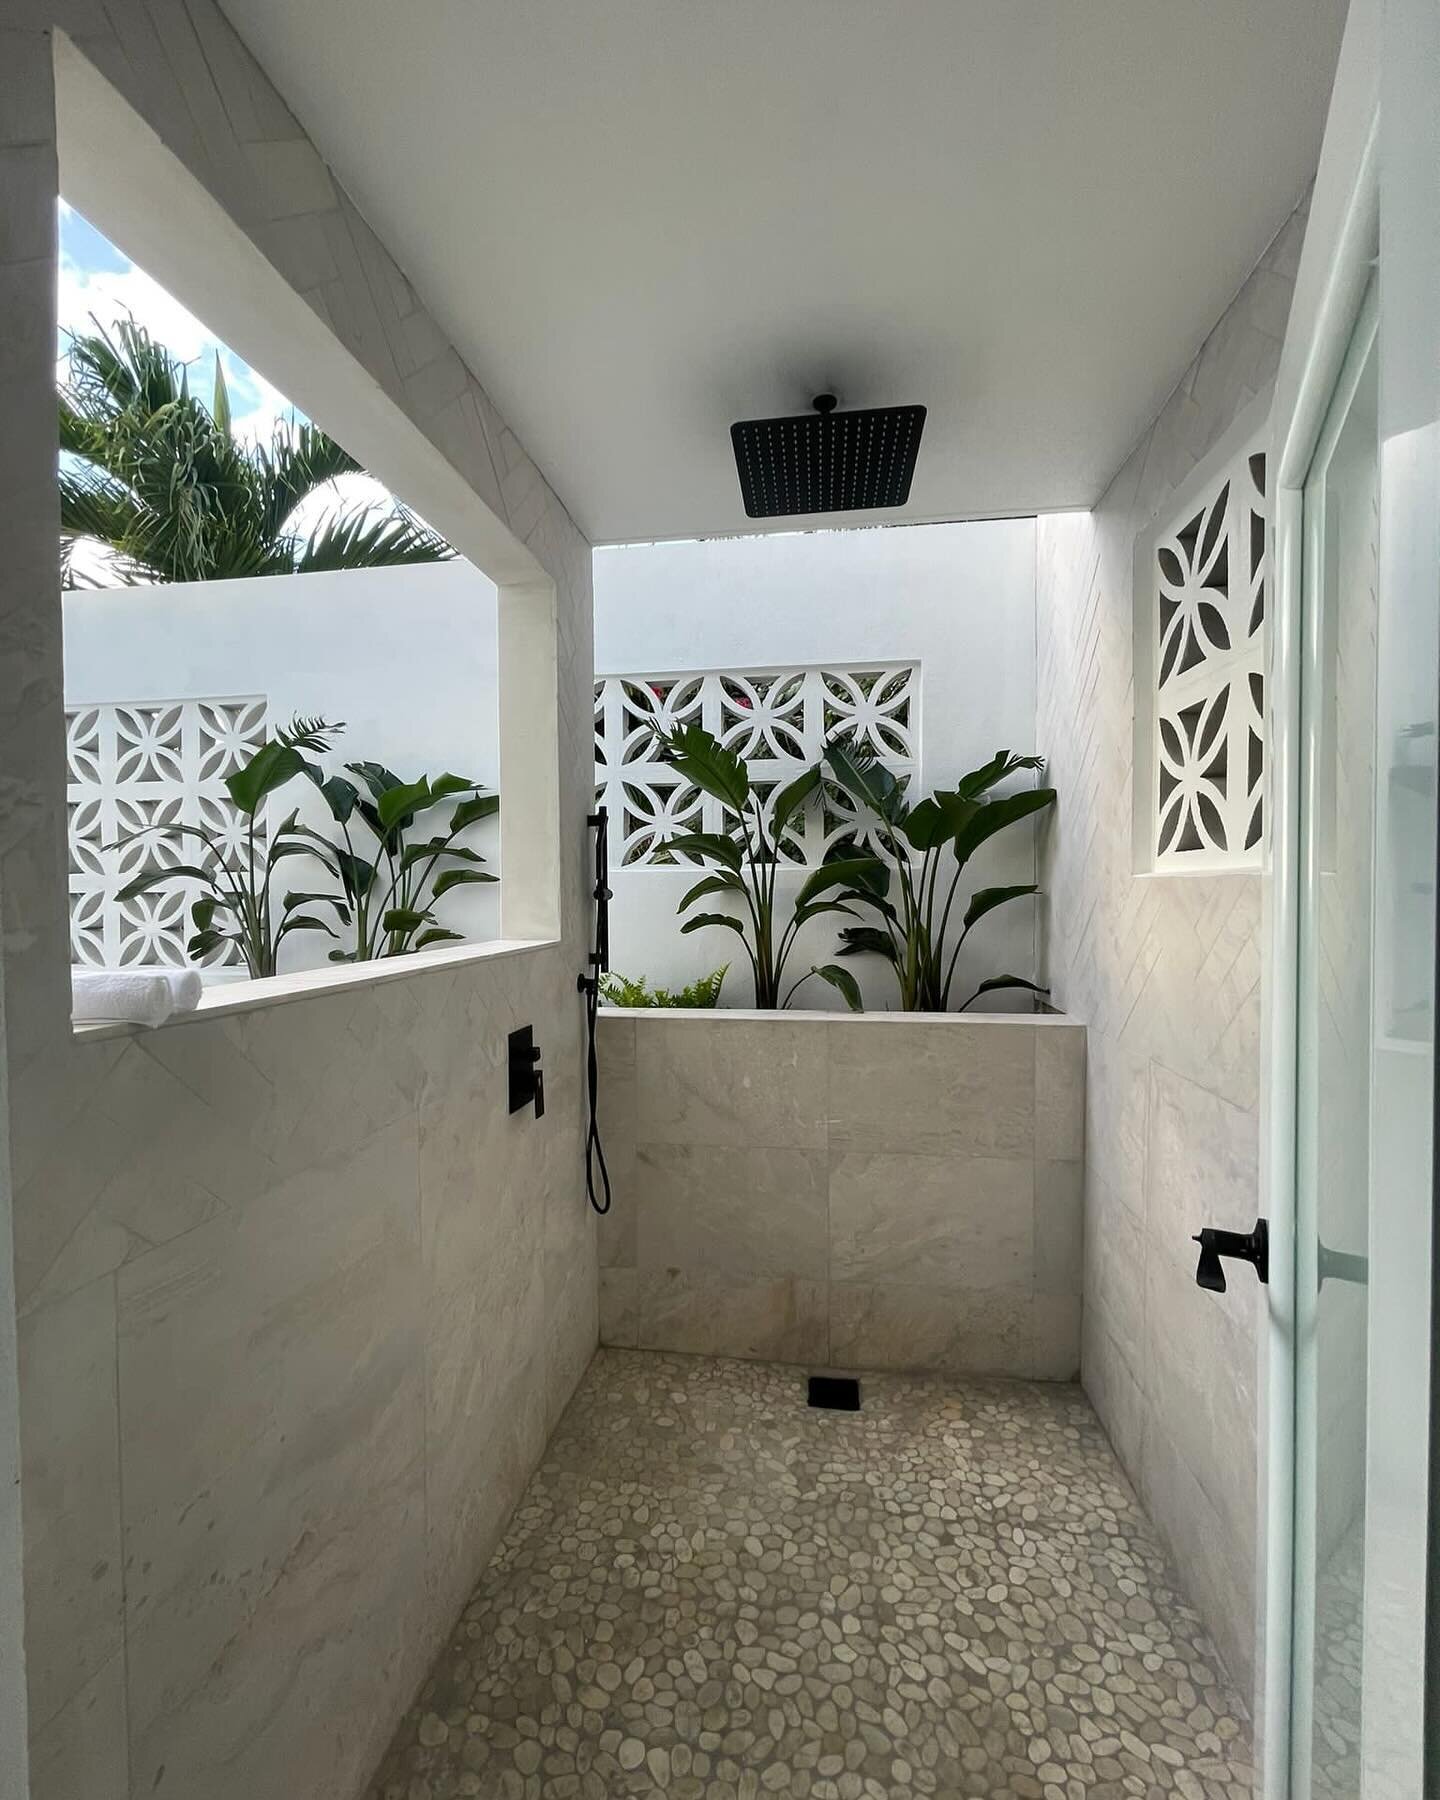 And that main floor shower and bath off the bedroom!  The views are for your pleasure as well. Shower and bathe in the sun or under the stars at night. So private and peaceful.